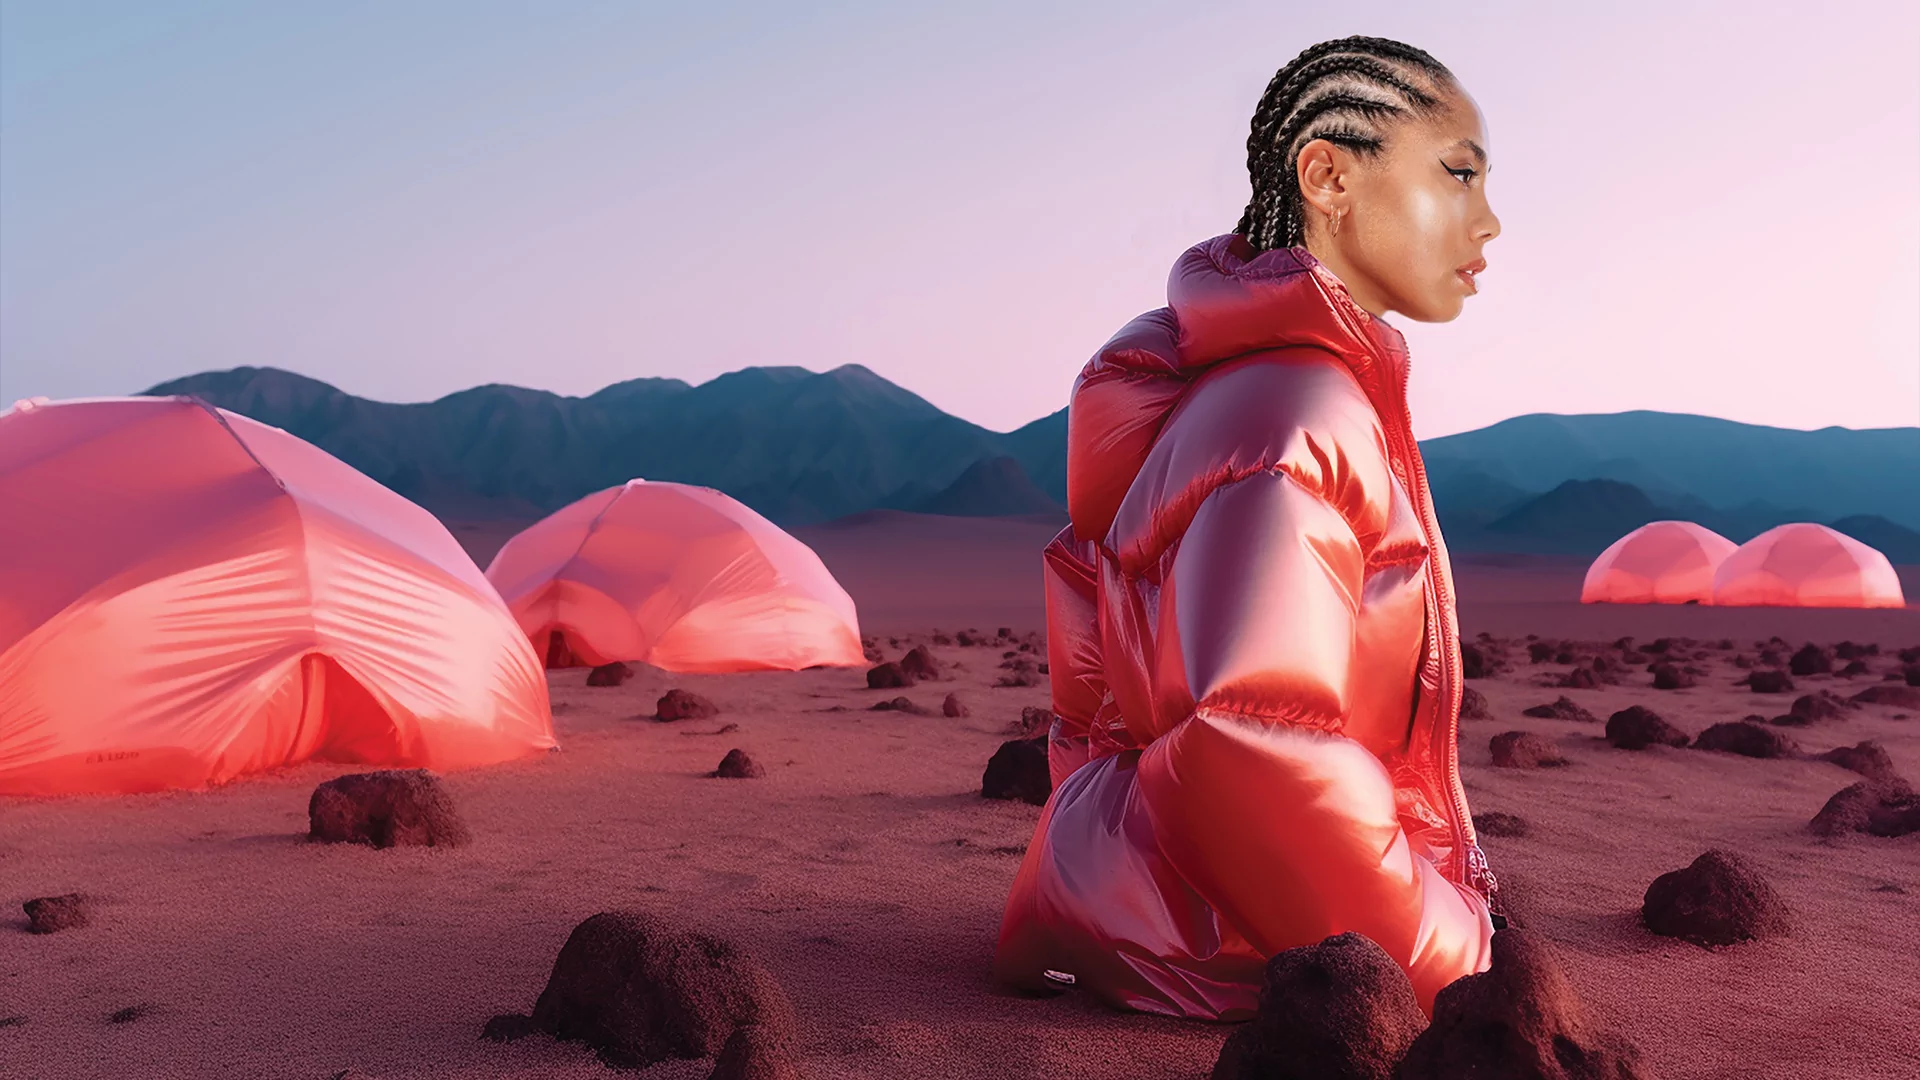 AI-edited photo of Jayda G in the desert. It appears as if she is emerging from the ground from the waist up. She's wearing a pink-red puffer jacket. She is next to a number of pink tents and there are mountains in the distance